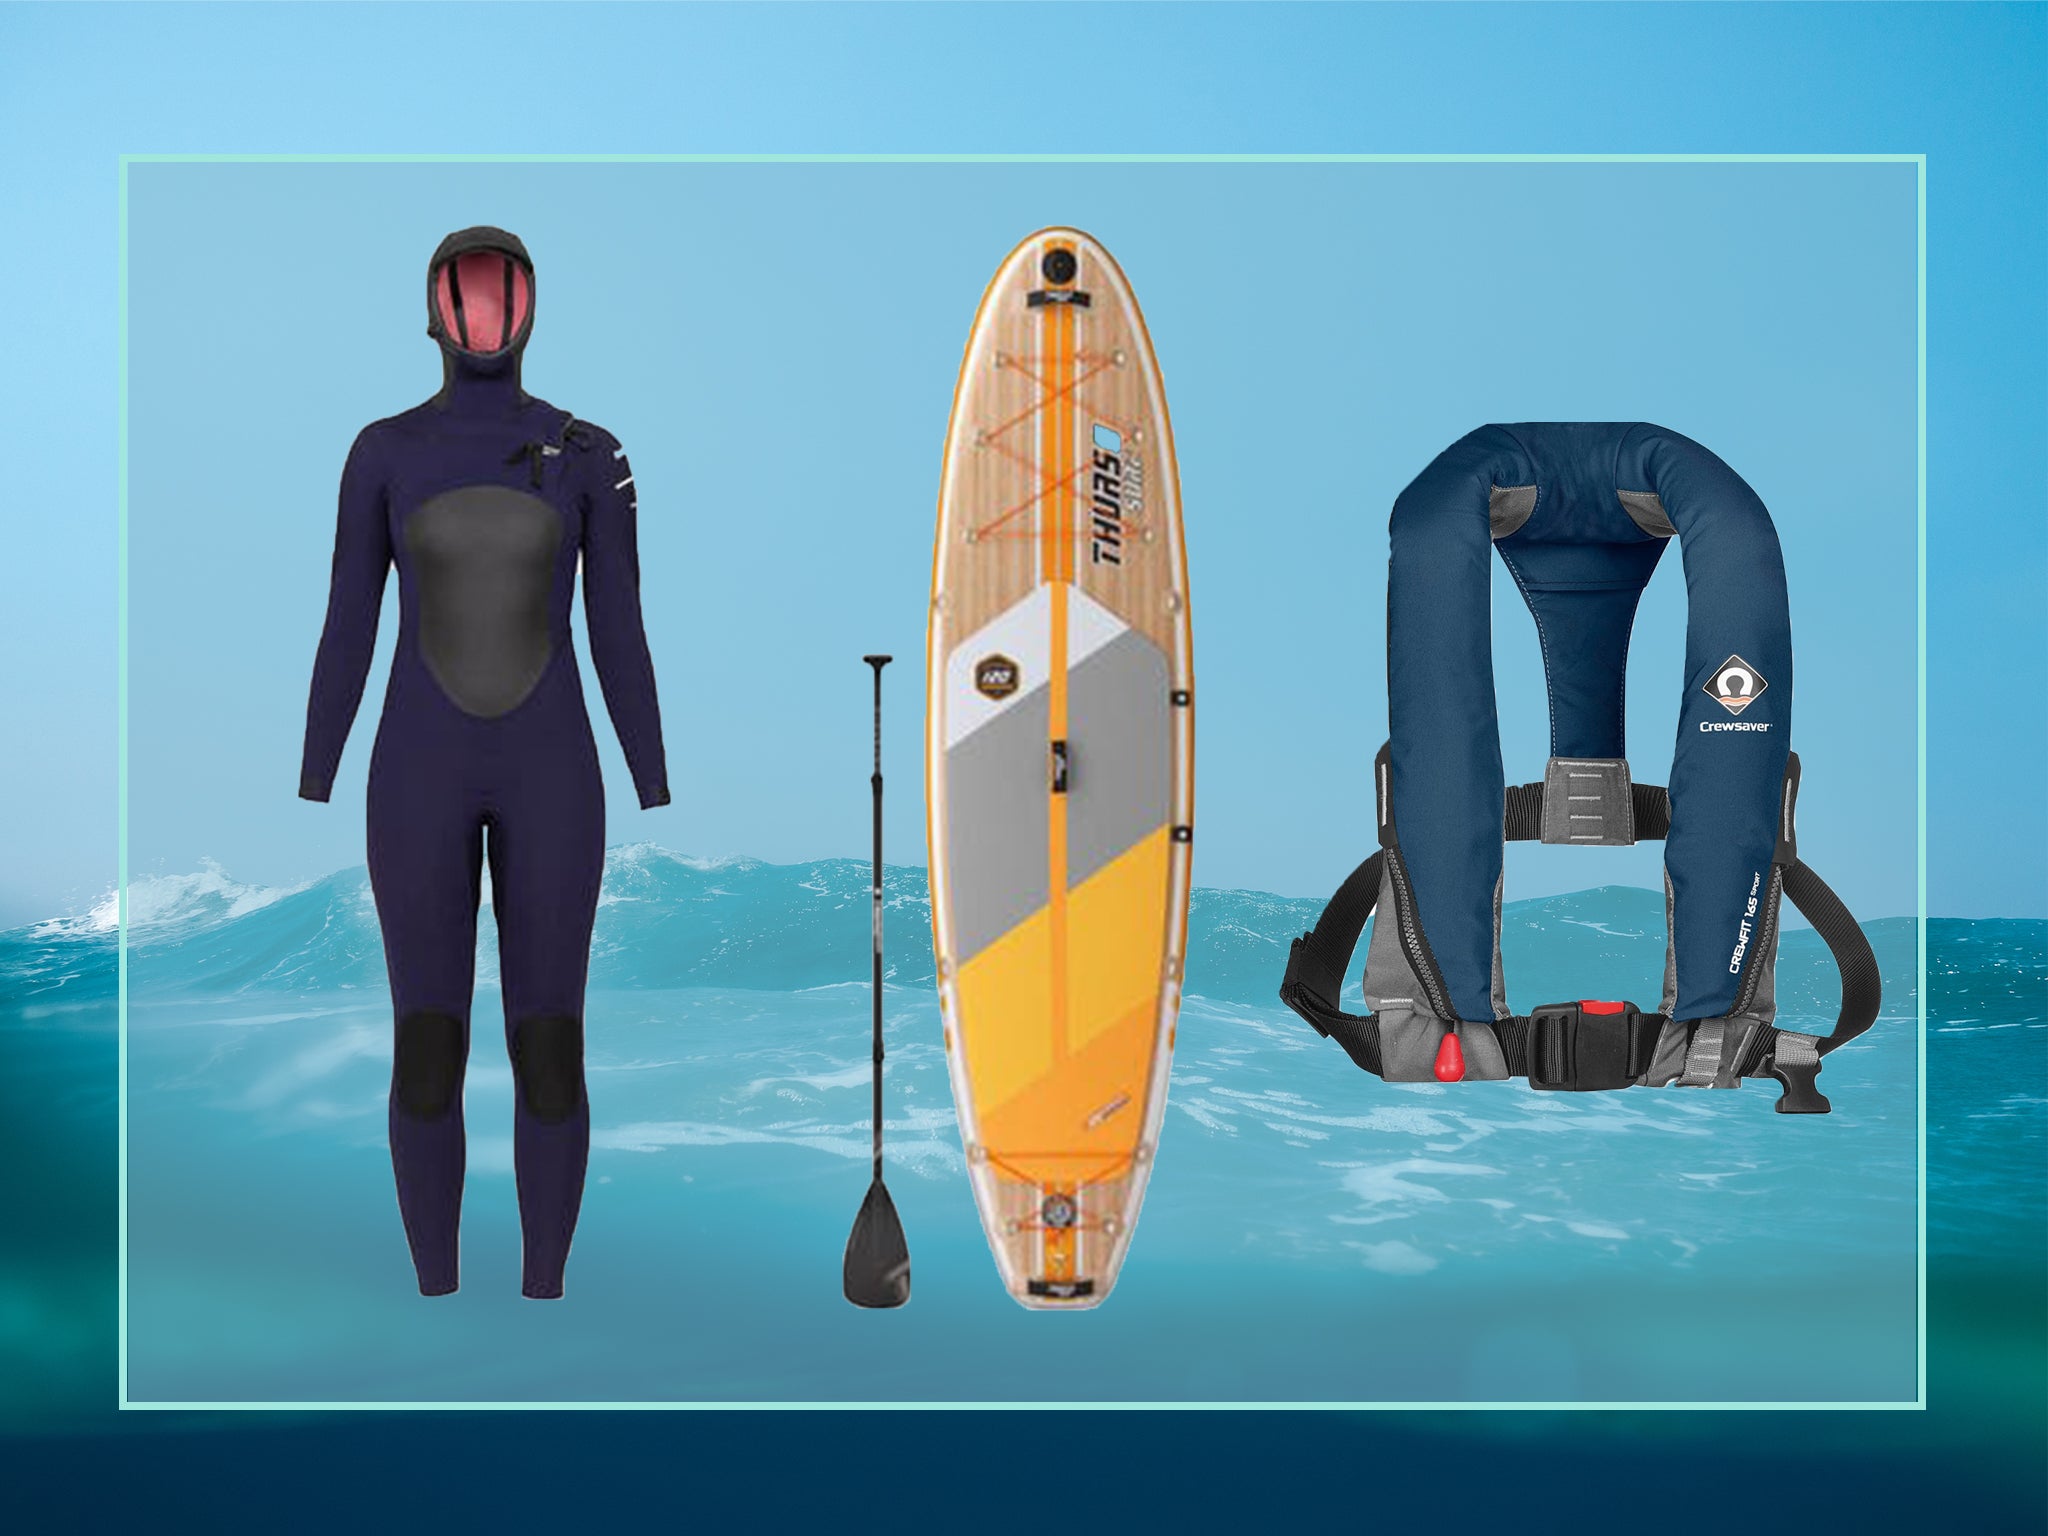 Get kitted out for a watersports staycation with life jackets, wetsuits, paddle boards and more